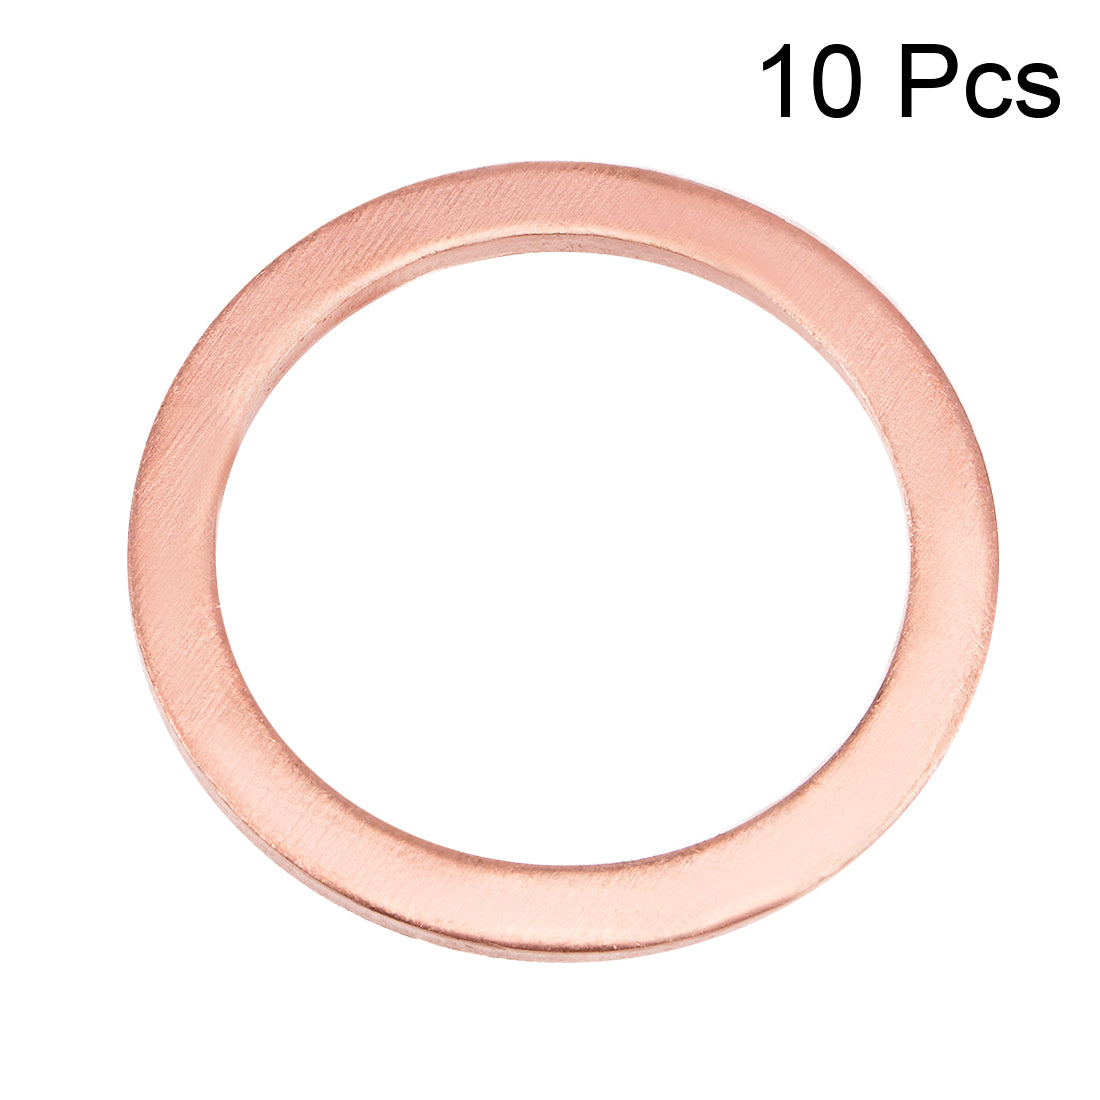 uxcell Uxcell 10Pcs 22mm x 28mm x 1.5mm Copper Flat Washer for Screw Bolt